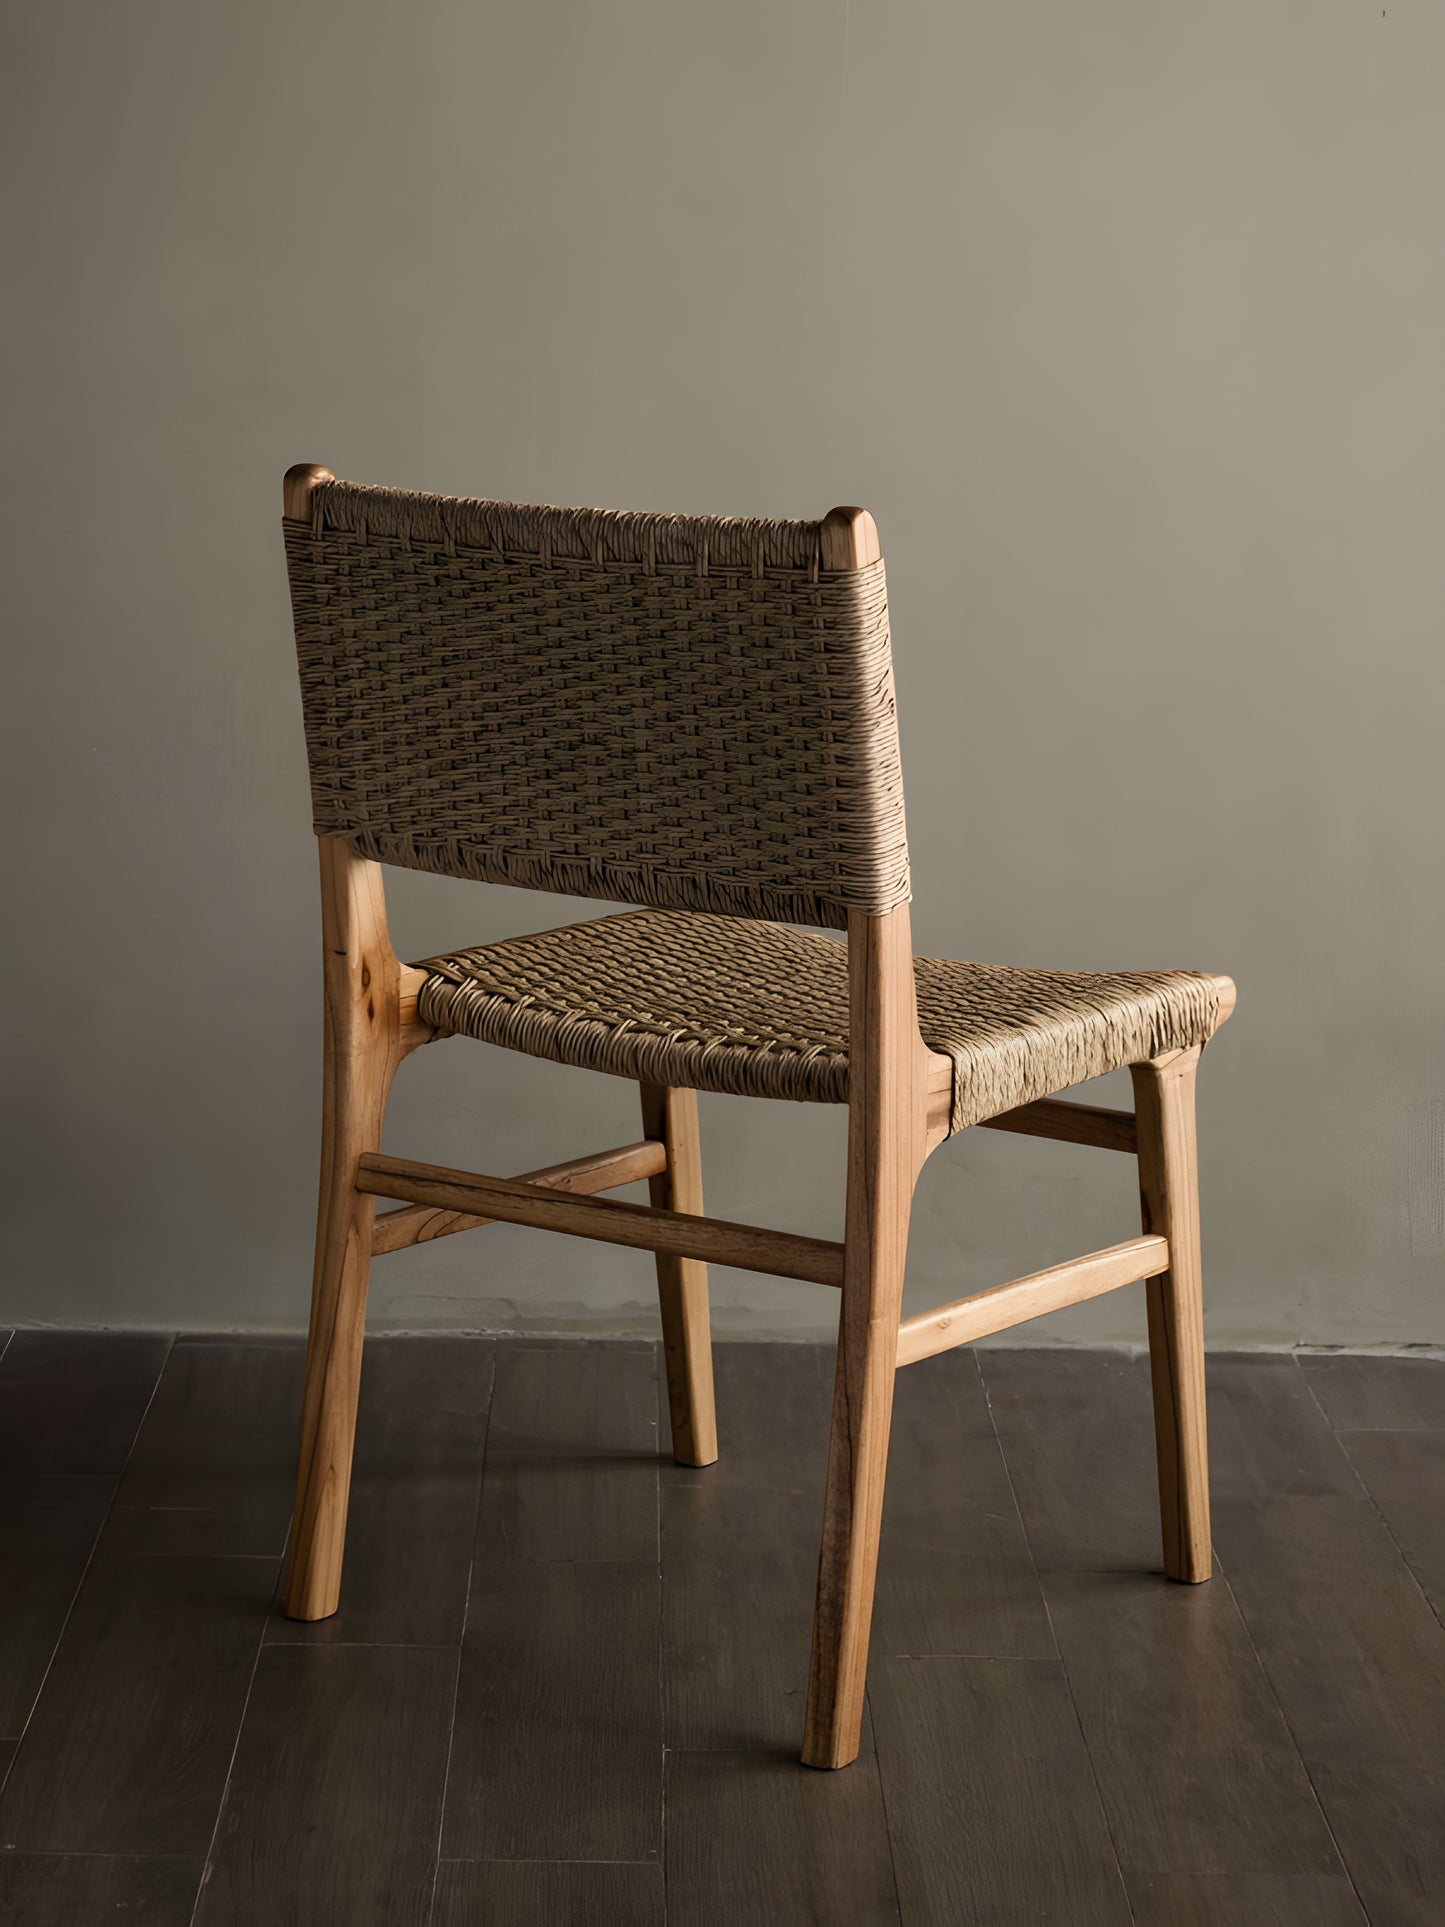 Asturia Mindi Wood & Rattan Weaved Back & Seat Dining Chair back view by Mellowdays Furniture